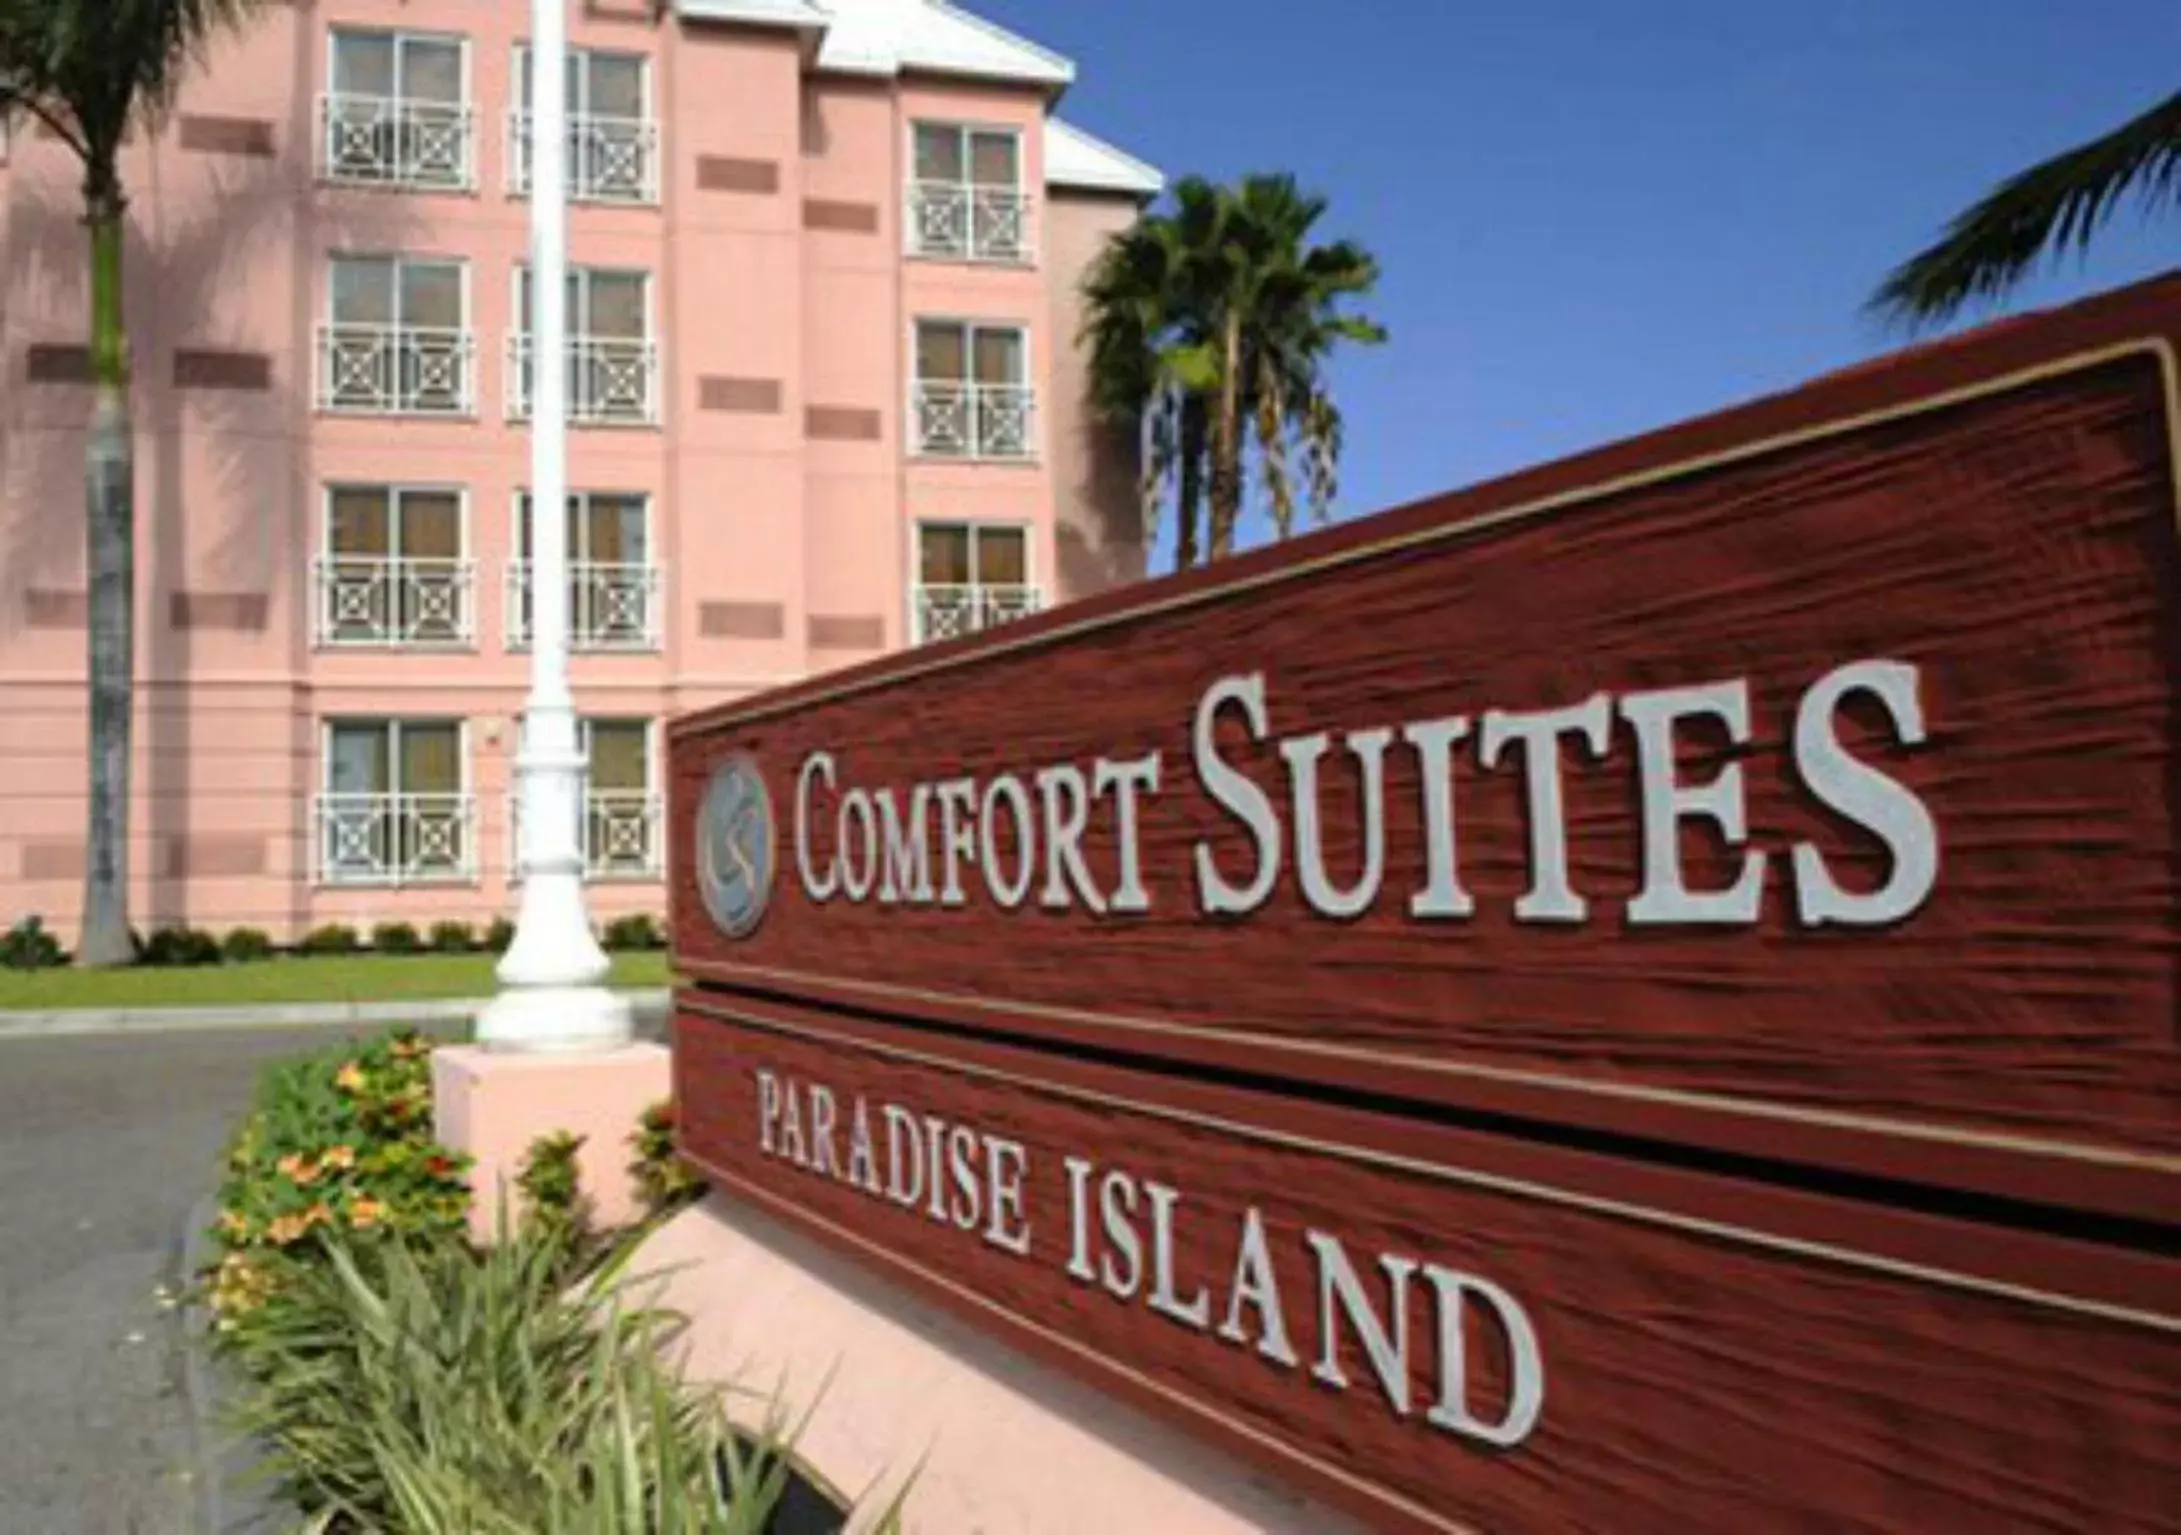 Facade/entrance, Property Logo/Sign in Comfort Suites Paradise Island